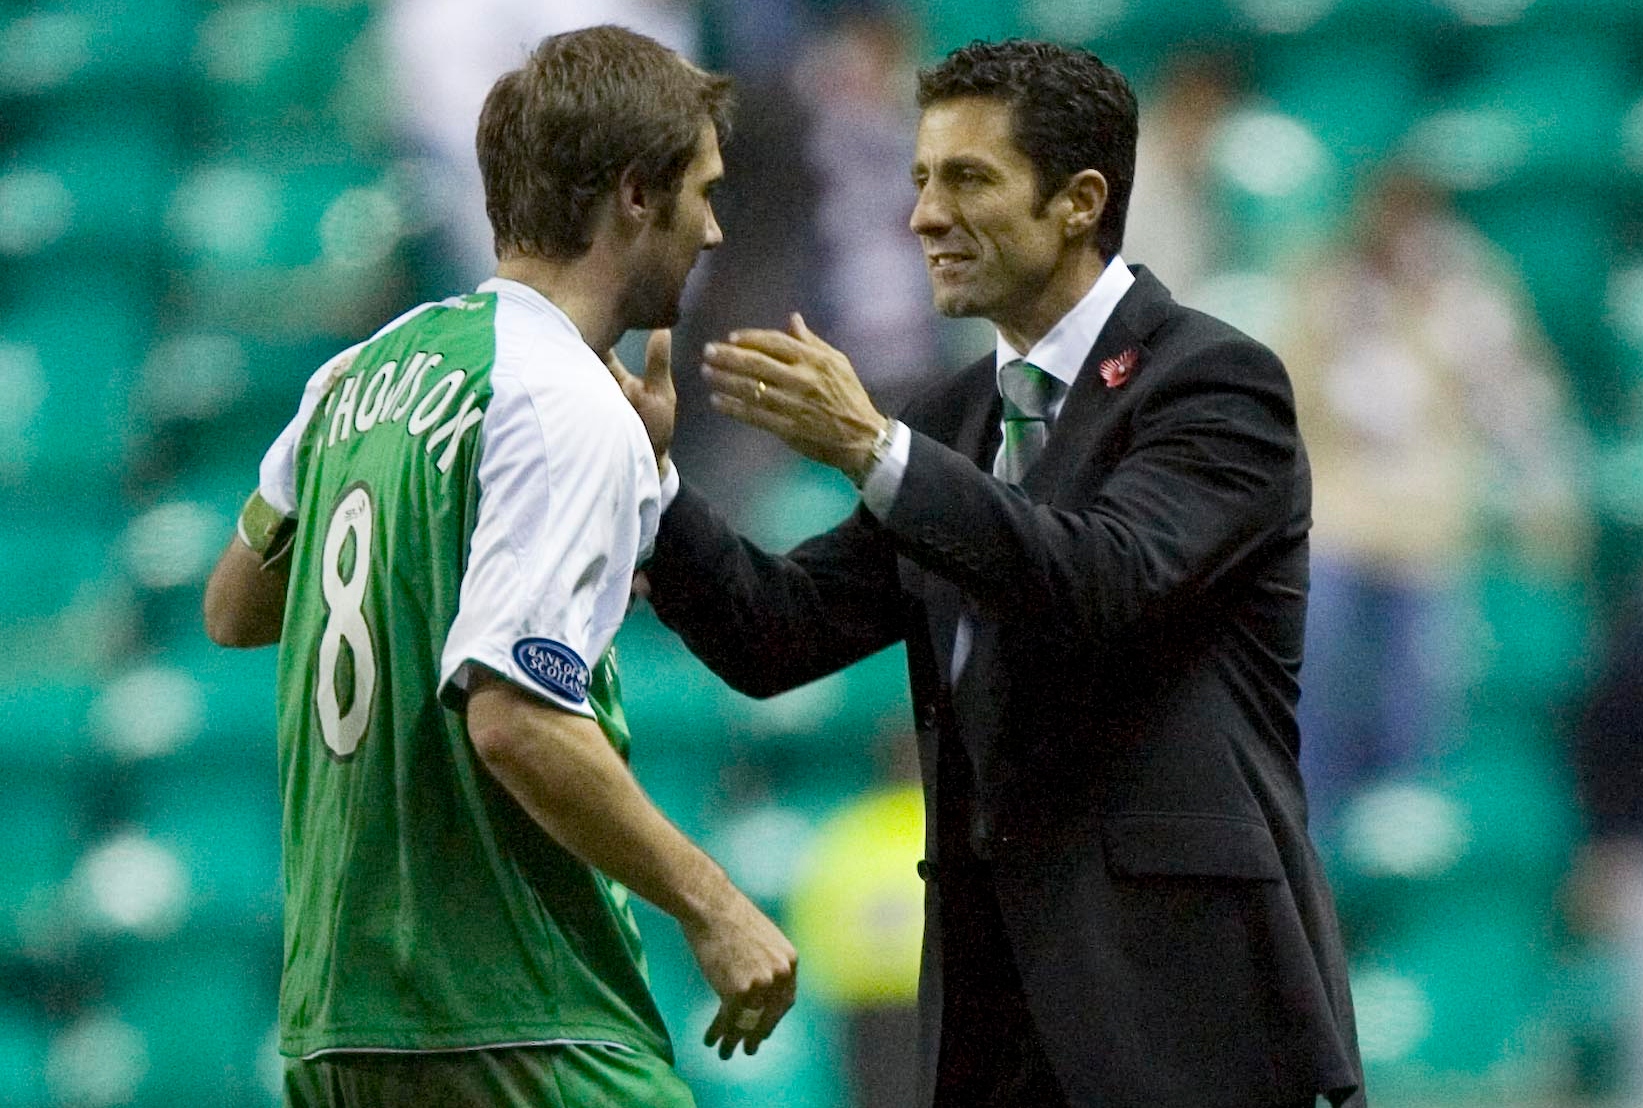 Ex-Hibs manager John Collins on why he stripped Kevin Thomson of club captaincy